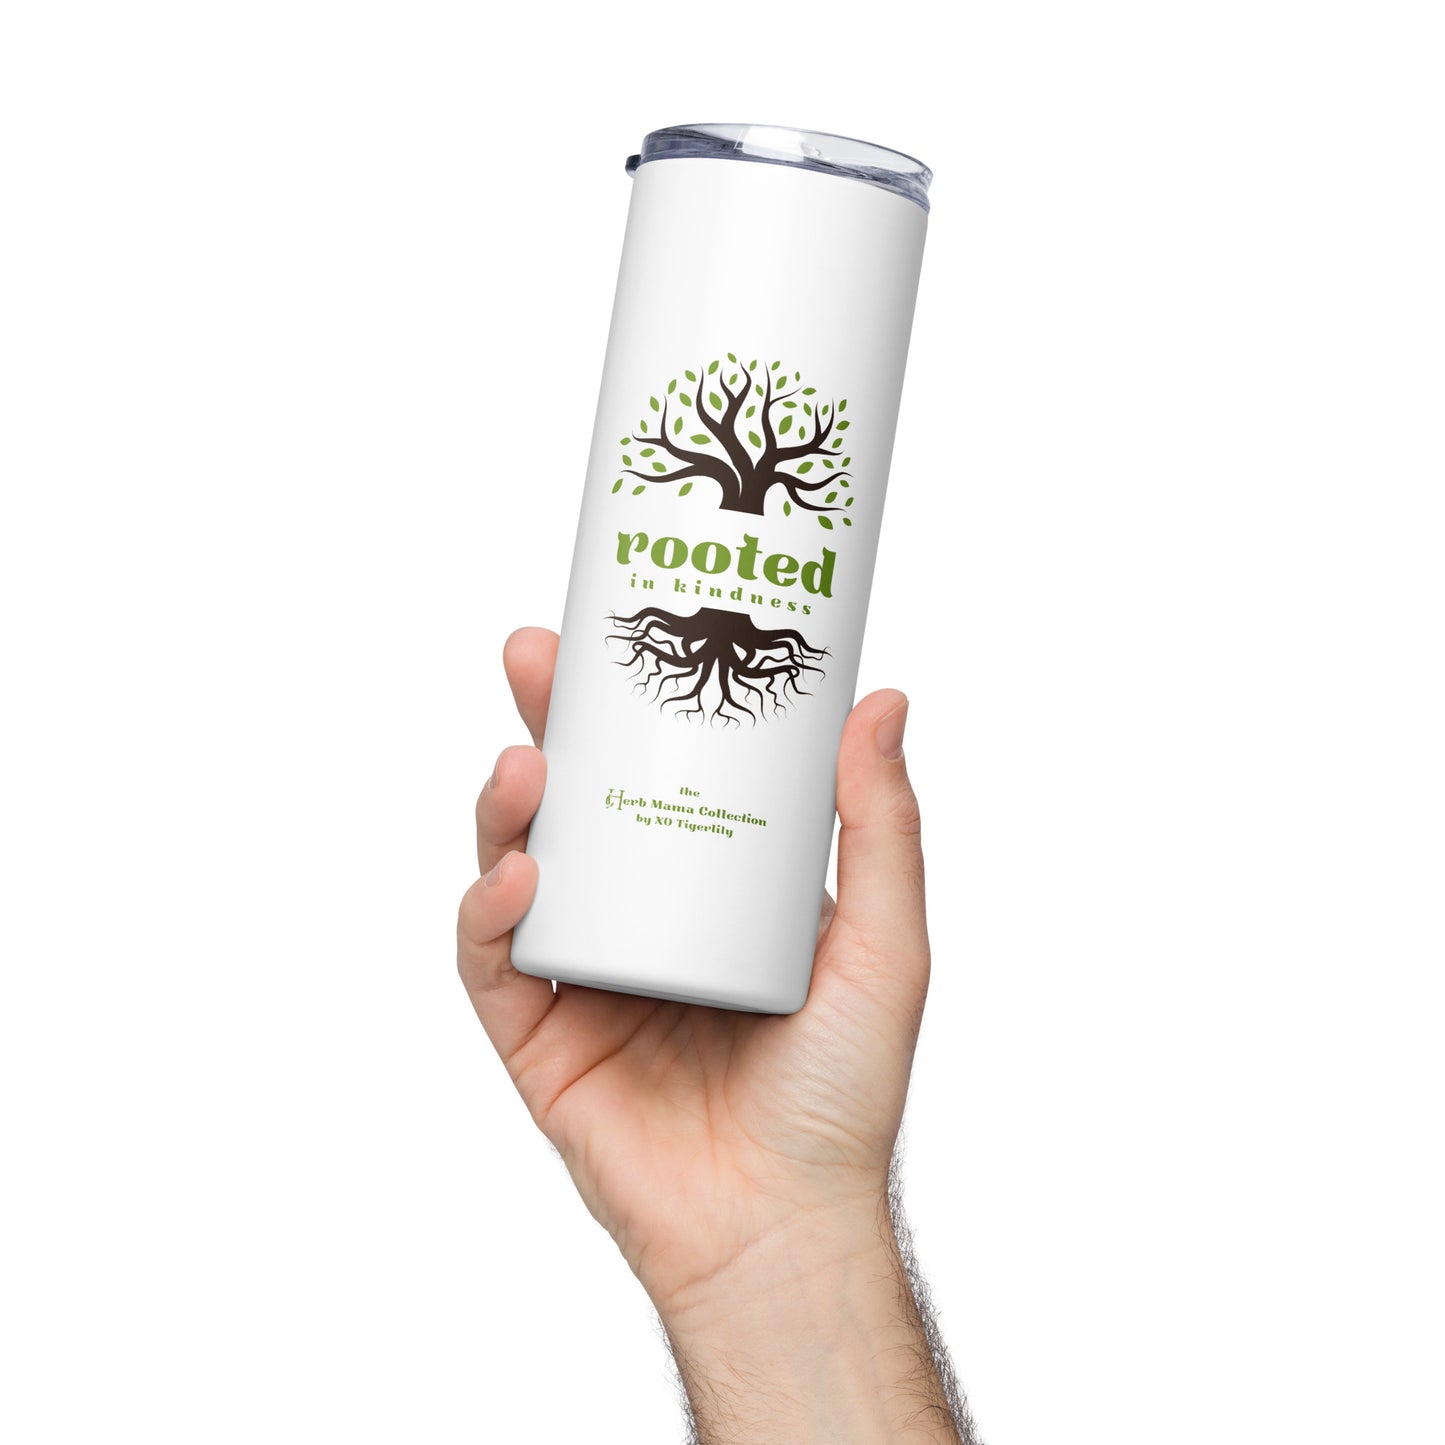 Rooted in Kindness Stainless Steel Tumbler